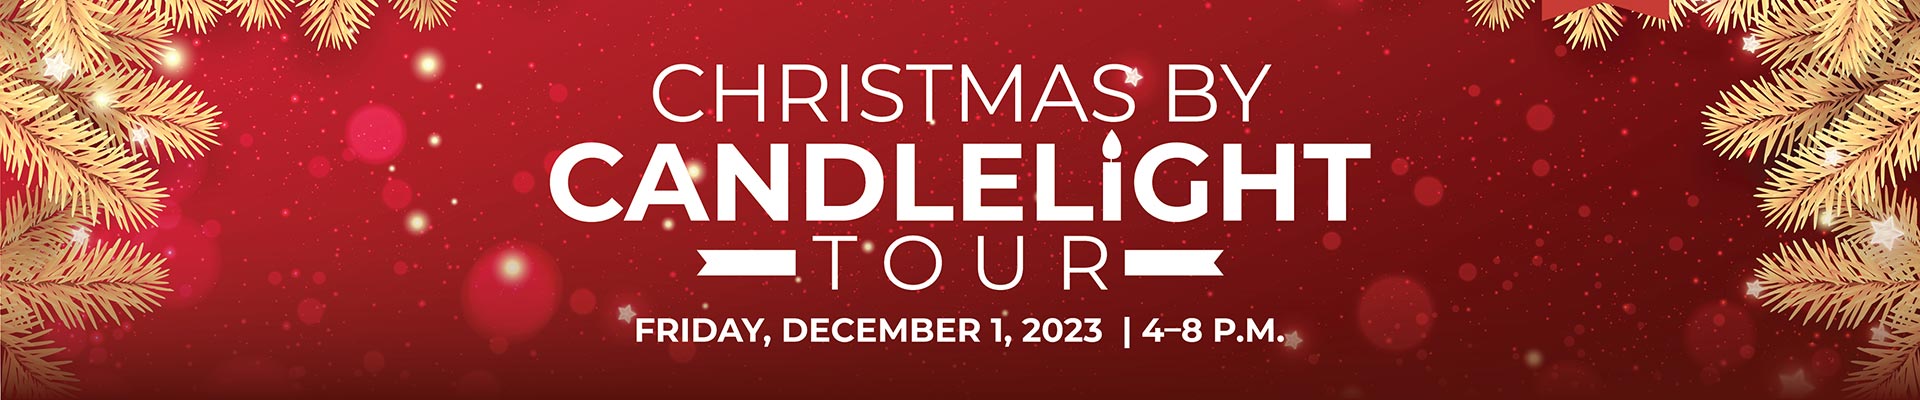 Christmas by Candlelight Tour, Dec. 1, 2023